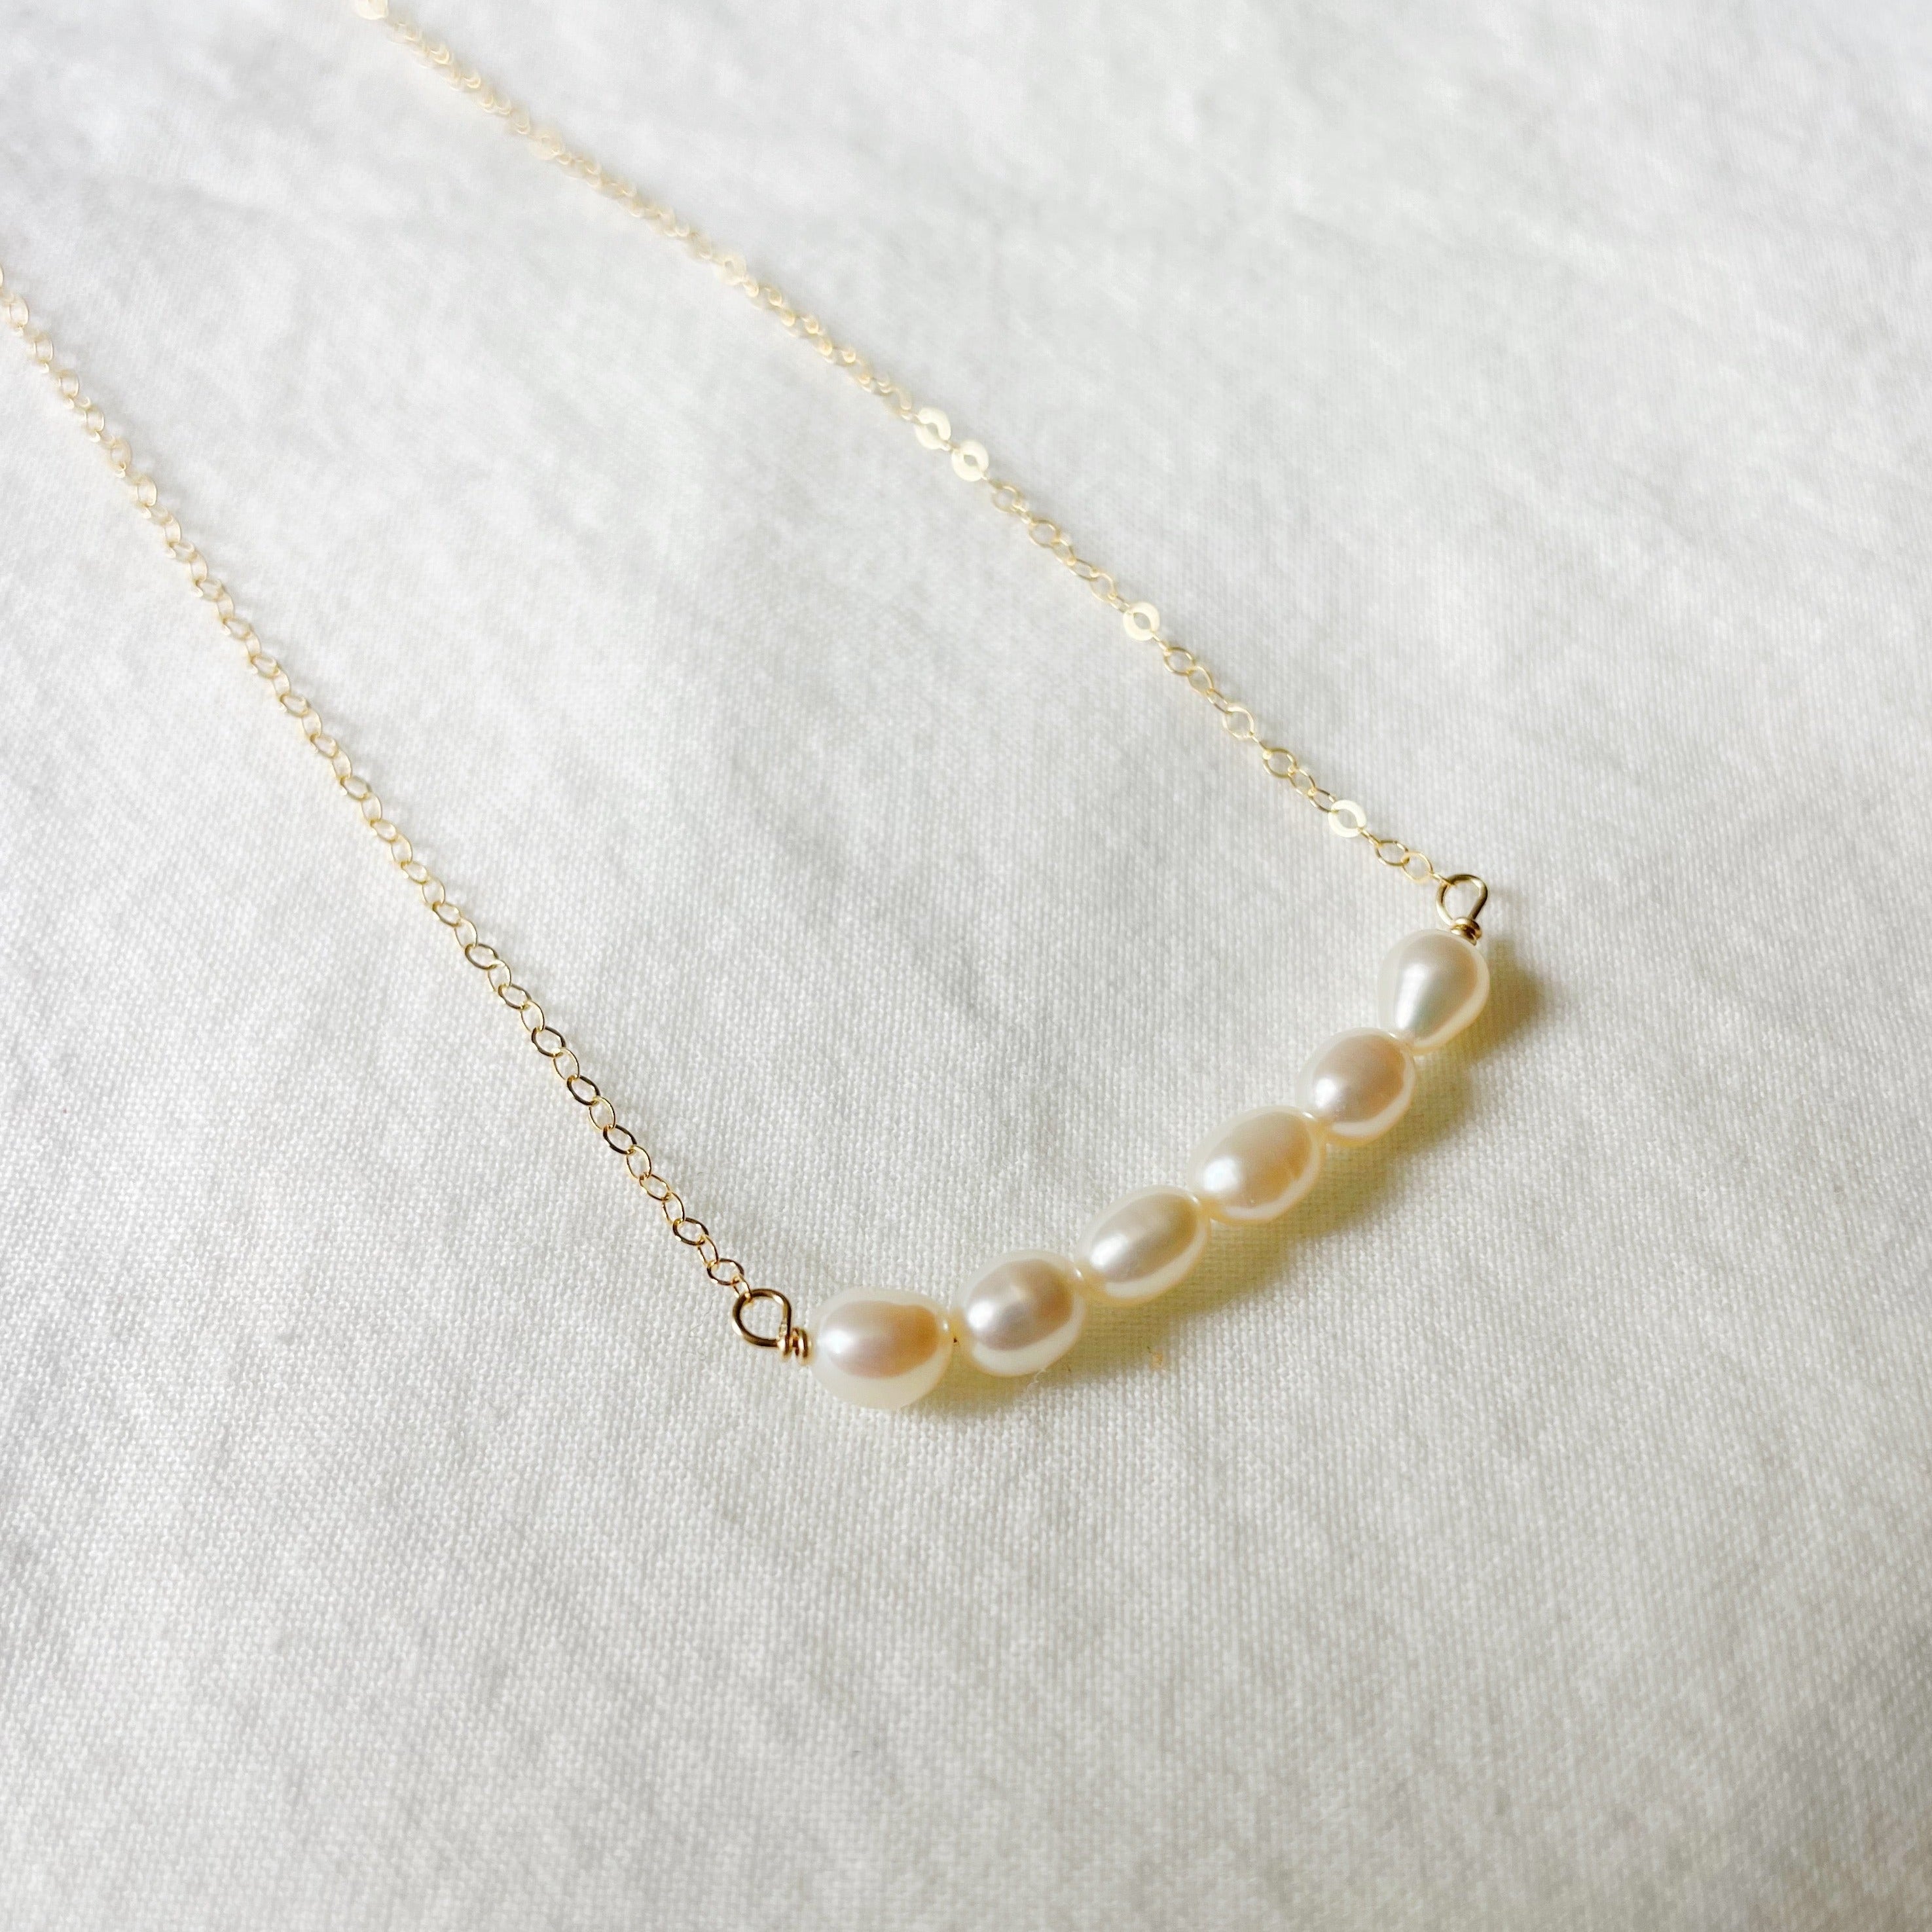 Perle Necklace (Gold-filled or Sterling Silver)